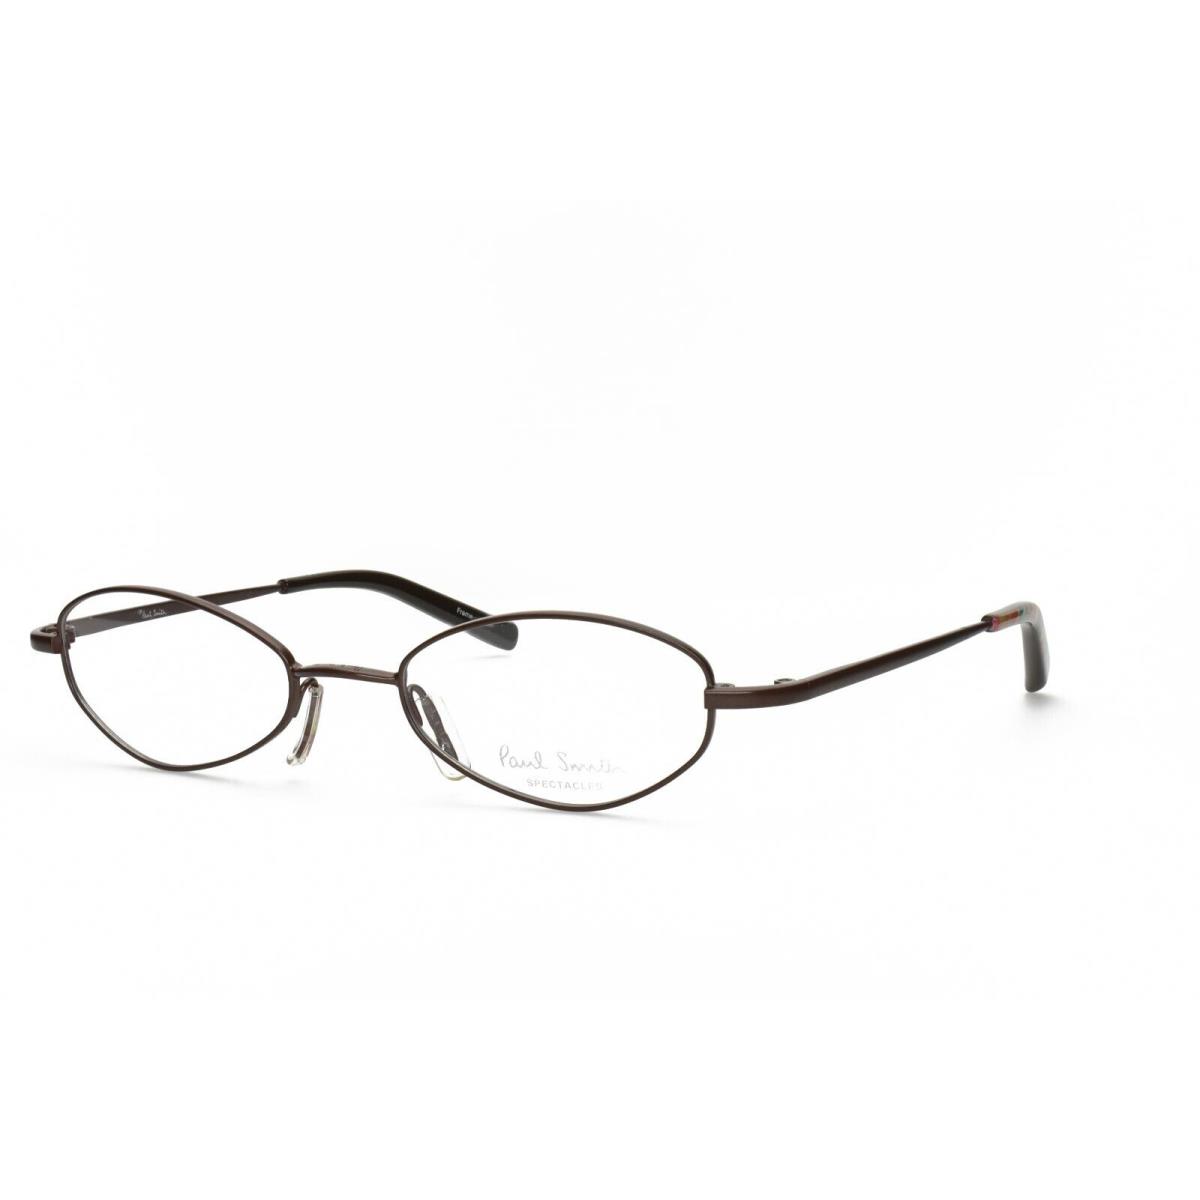 Paul Smith PS 198 Cho Eyeglasses Frames Only 48-19-132